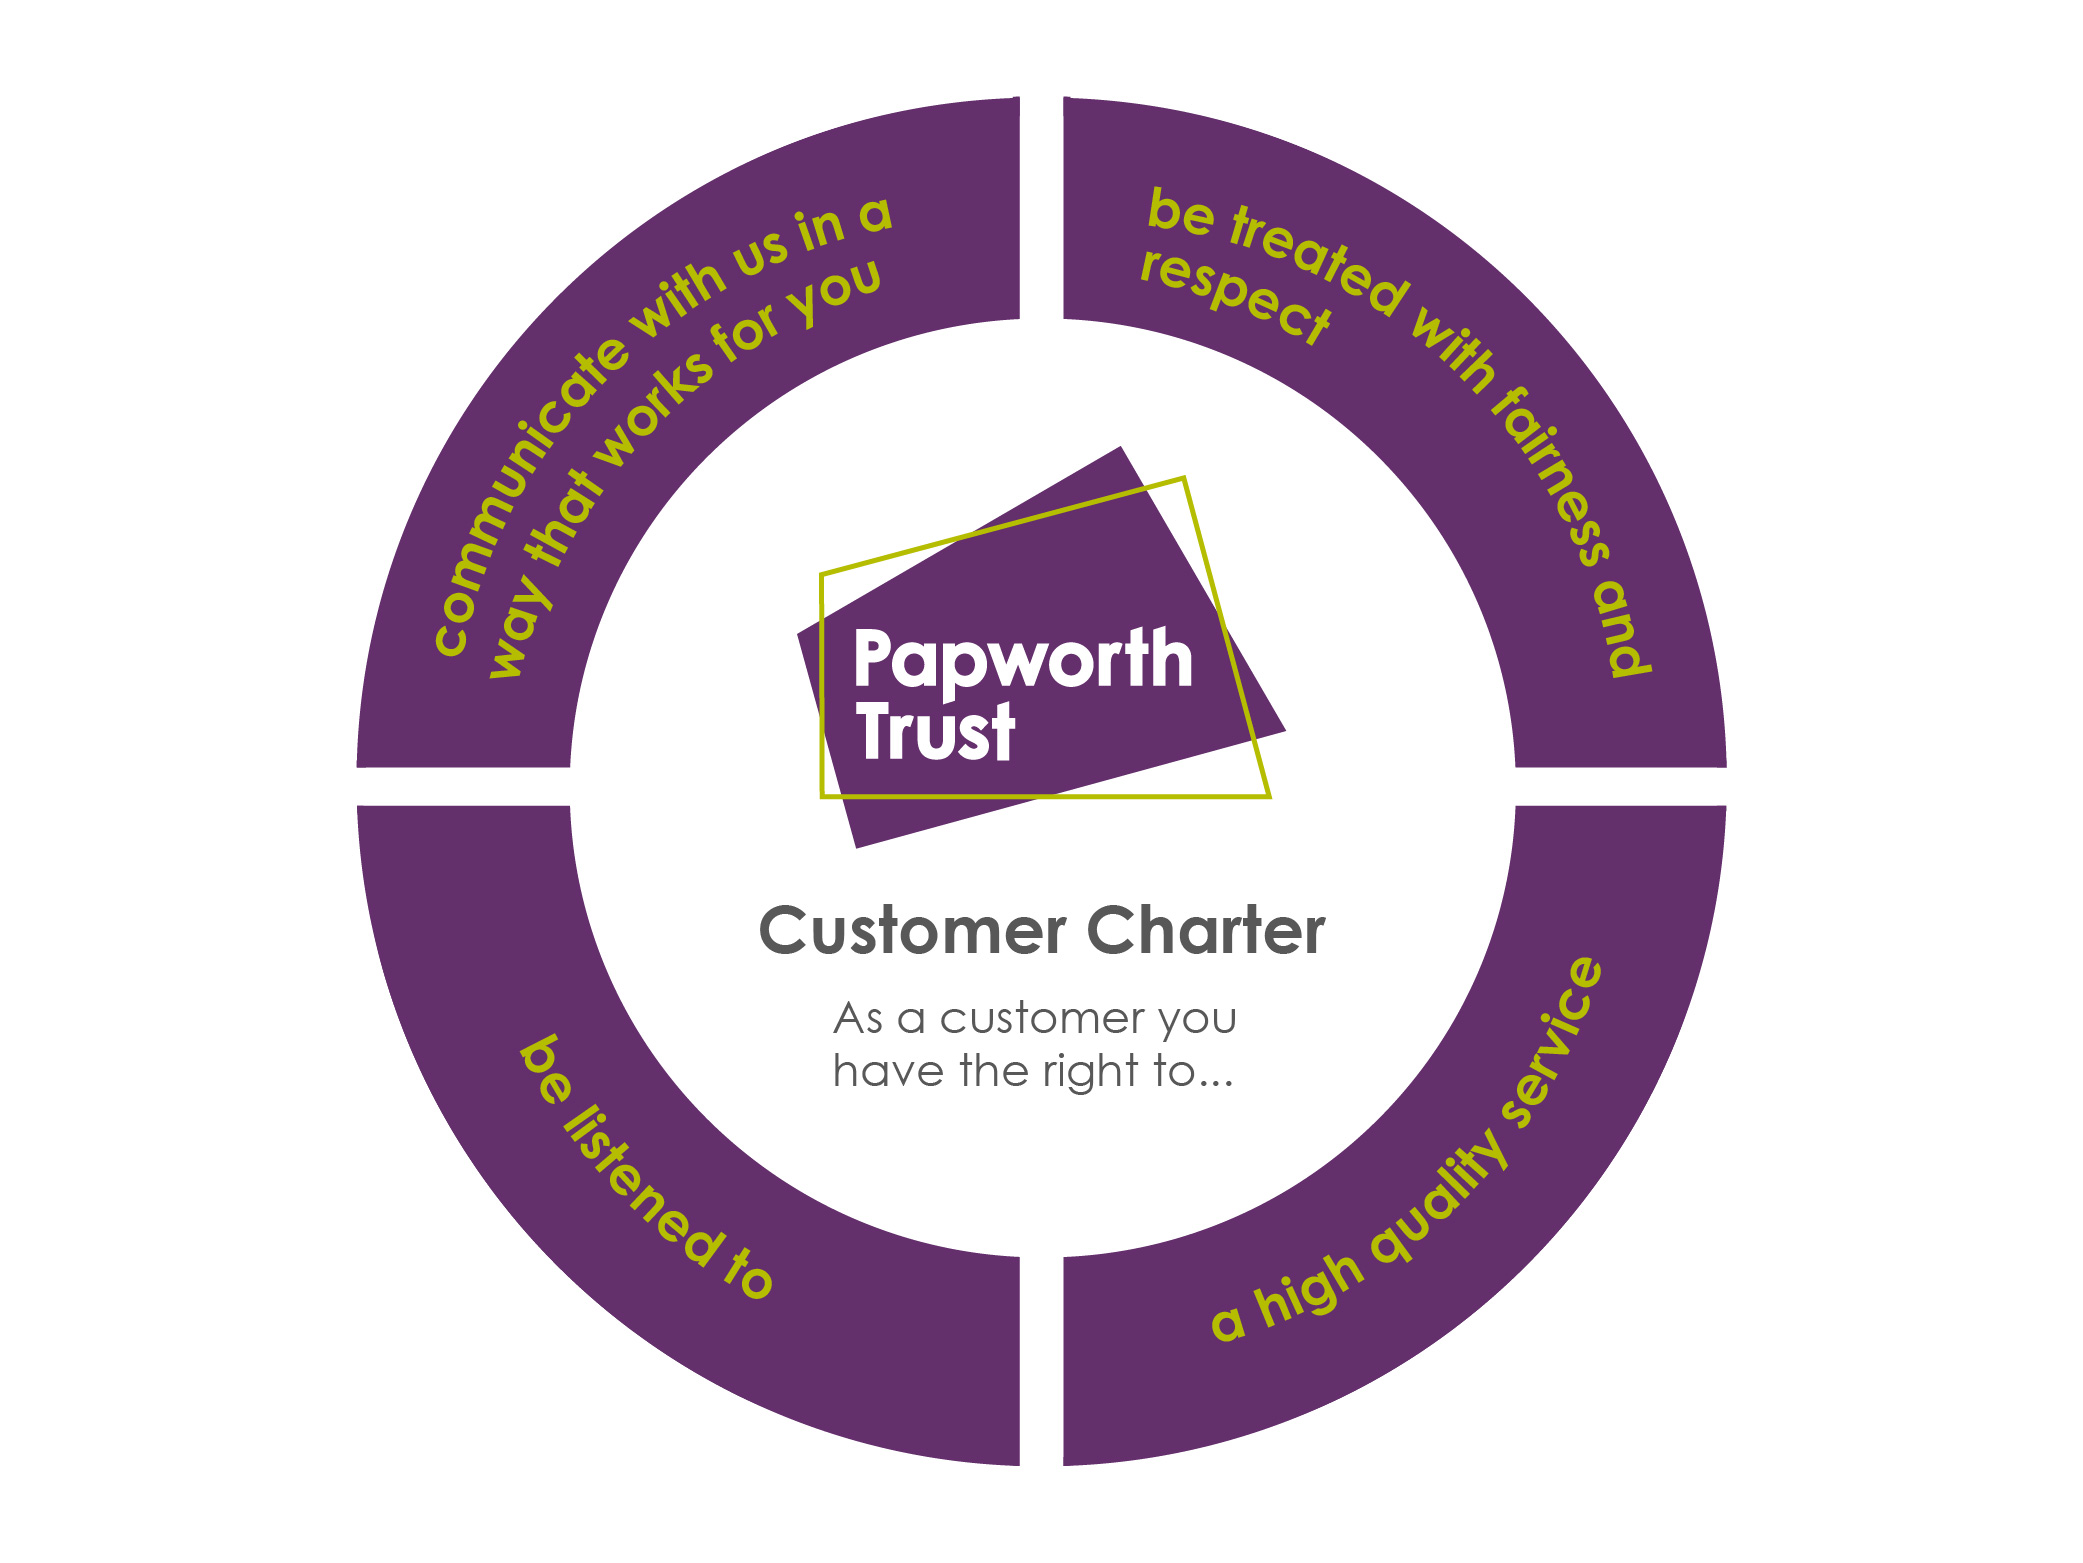 An image of our customer charter values